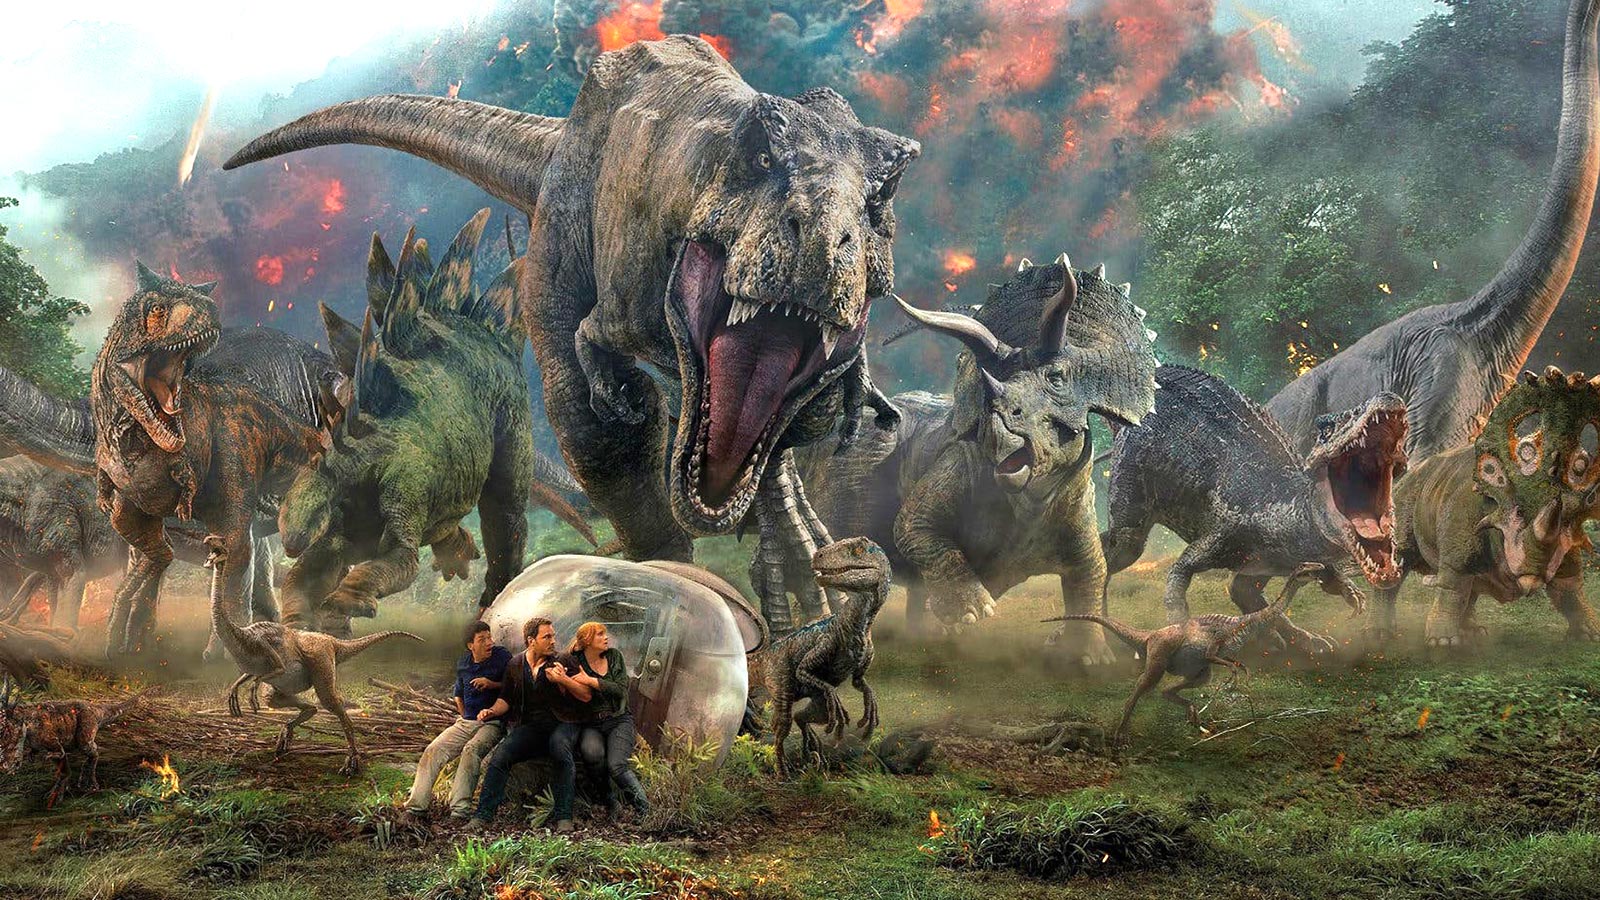 If You’ve Seen 20/39 of the Films That’ve Made Over $1 Billion, You’re a Real Movie Buff Jurassic World Fallen Kingdom escaping the dinosaurs